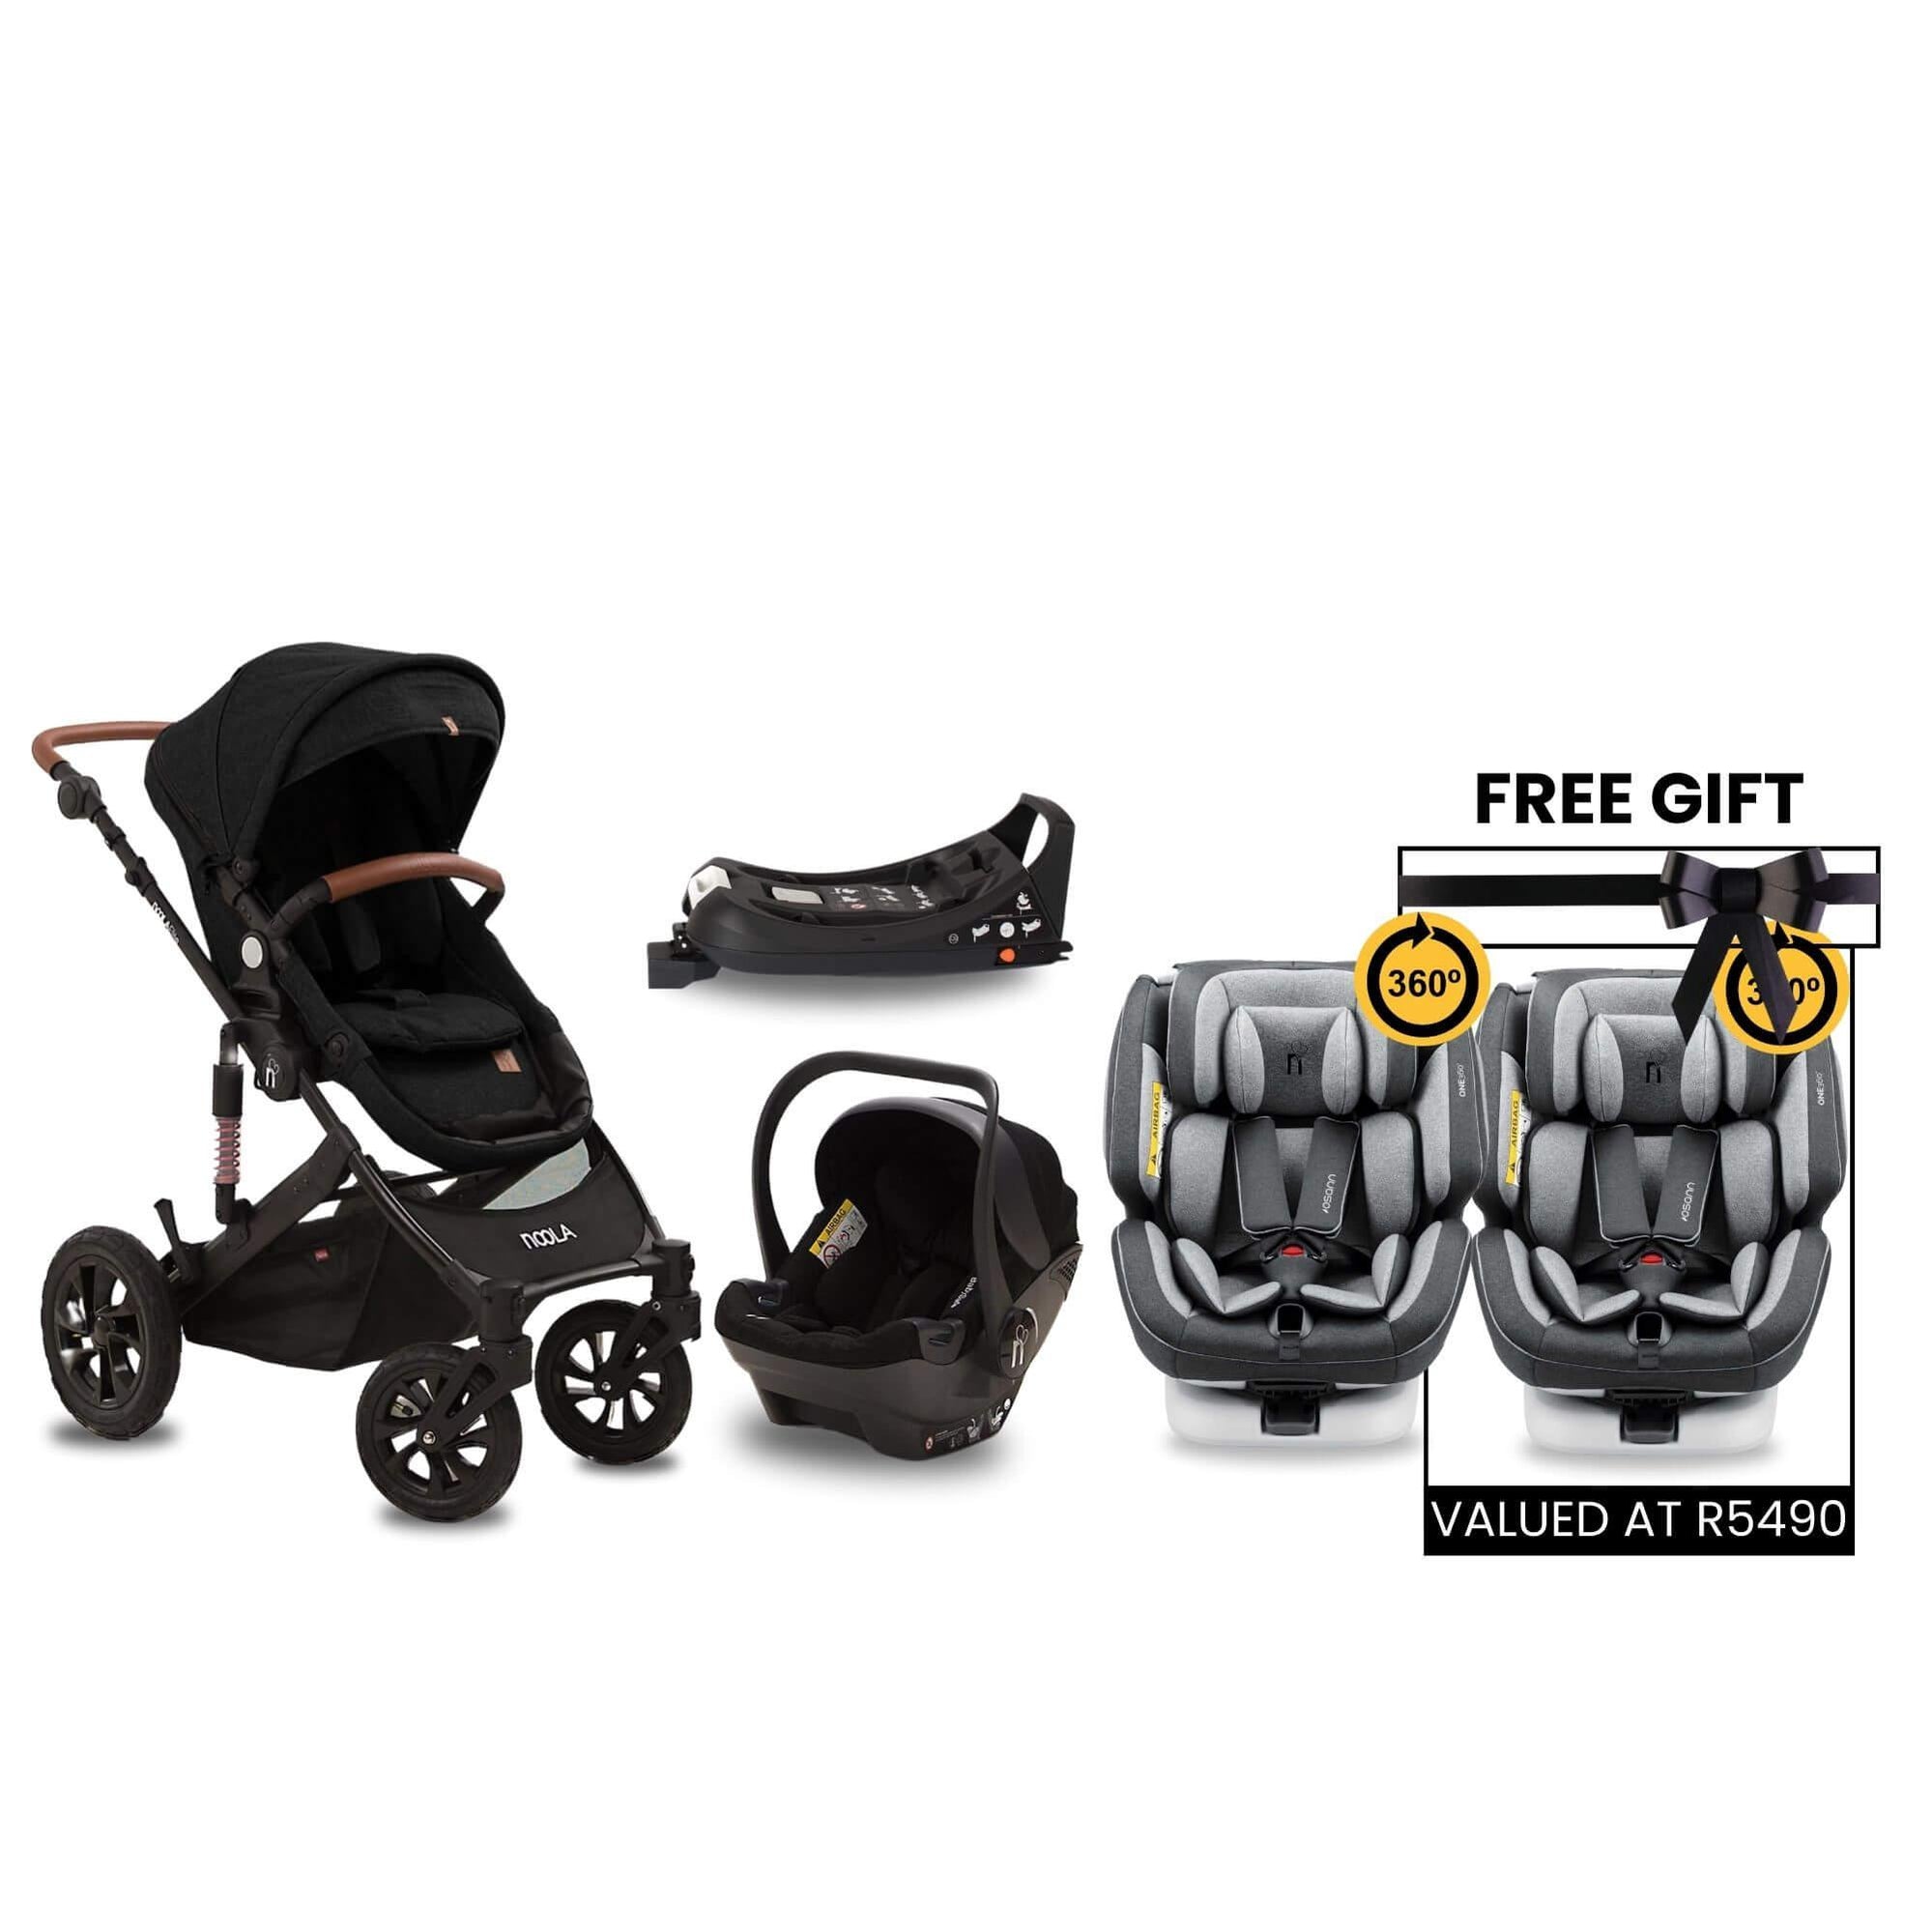 noola the elite 5in1 travel system midnight black baby stroller #SELECT THE COLOUR OF YOUR ONE360_ONE360 | LUNAR GREY